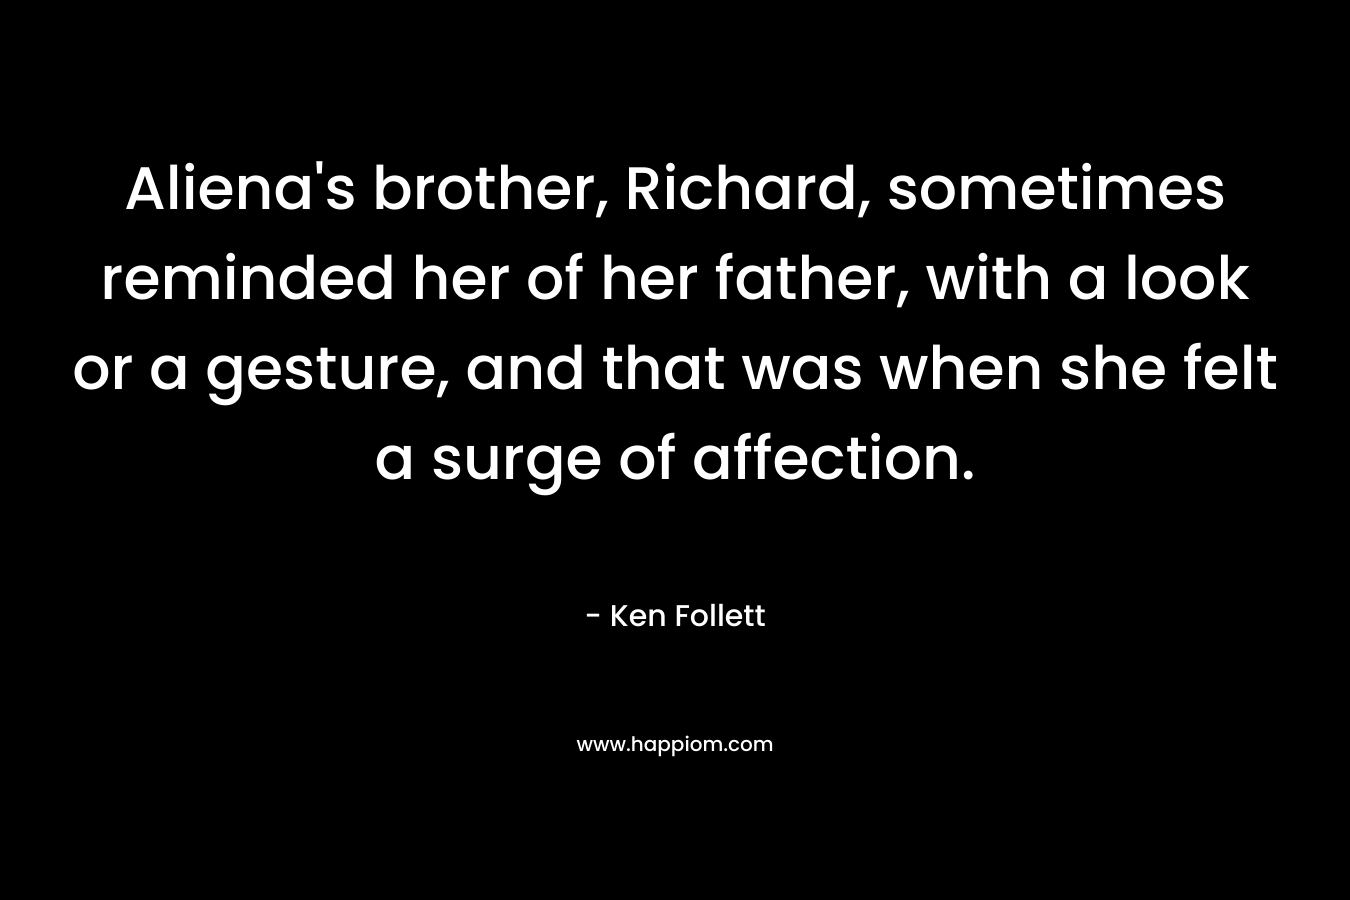 Aliena’s brother, Richard, sometimes reminded her of her father, with a look or a gesture, and that was when she felt a surge of affection. – Ken Follett